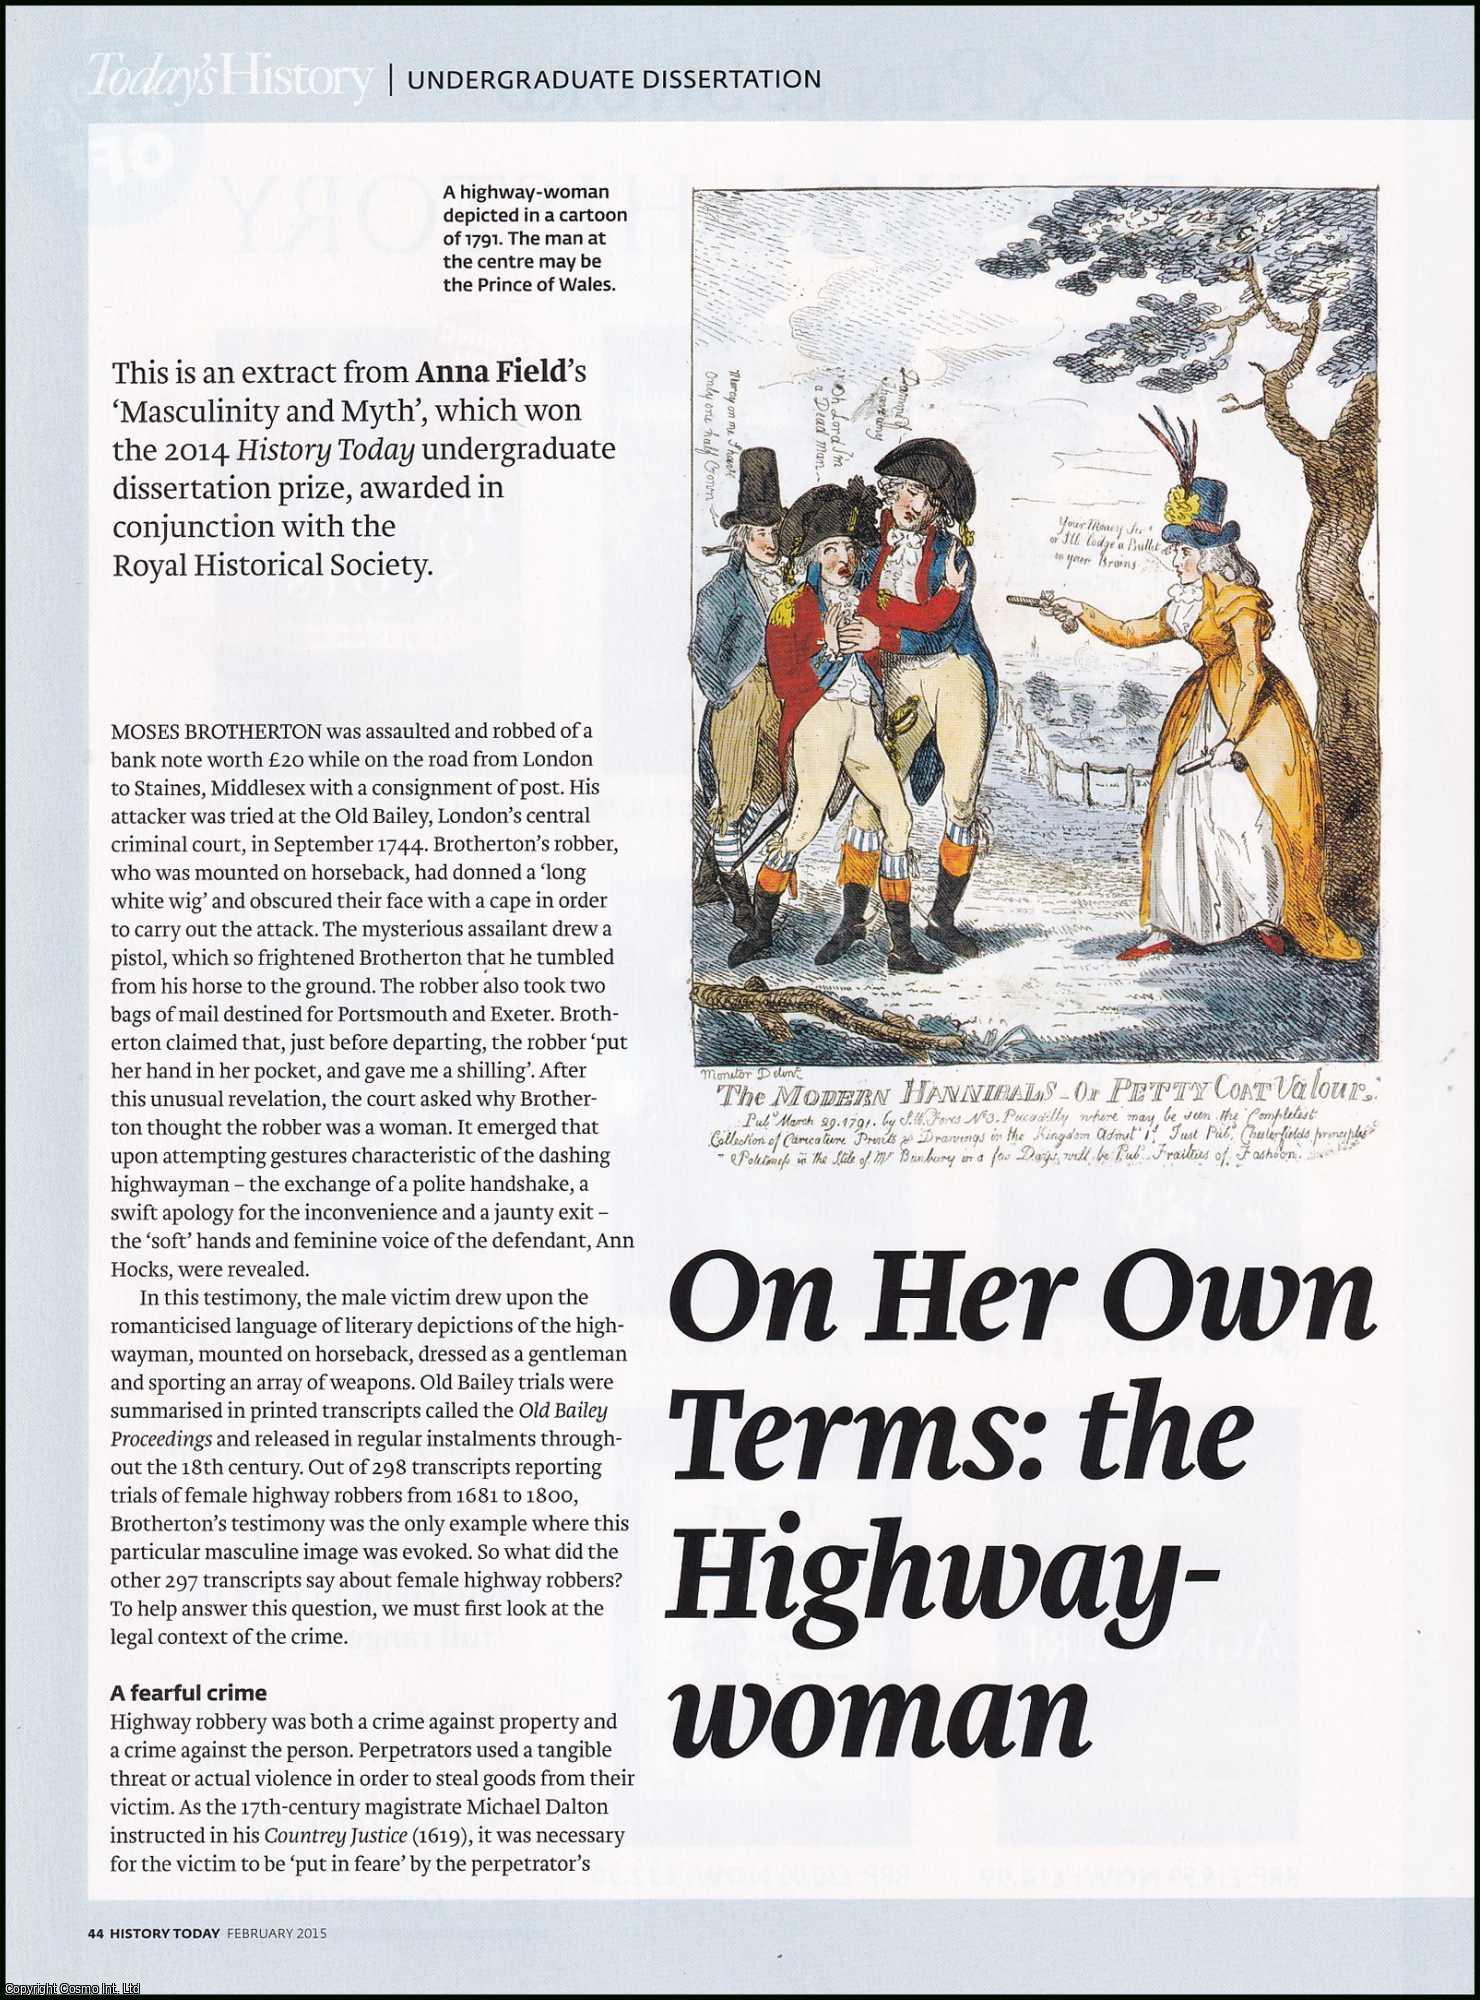 Anna Field - The Highway-Woman: On Her Own Terms. An original article from History Today magazine, 2015.